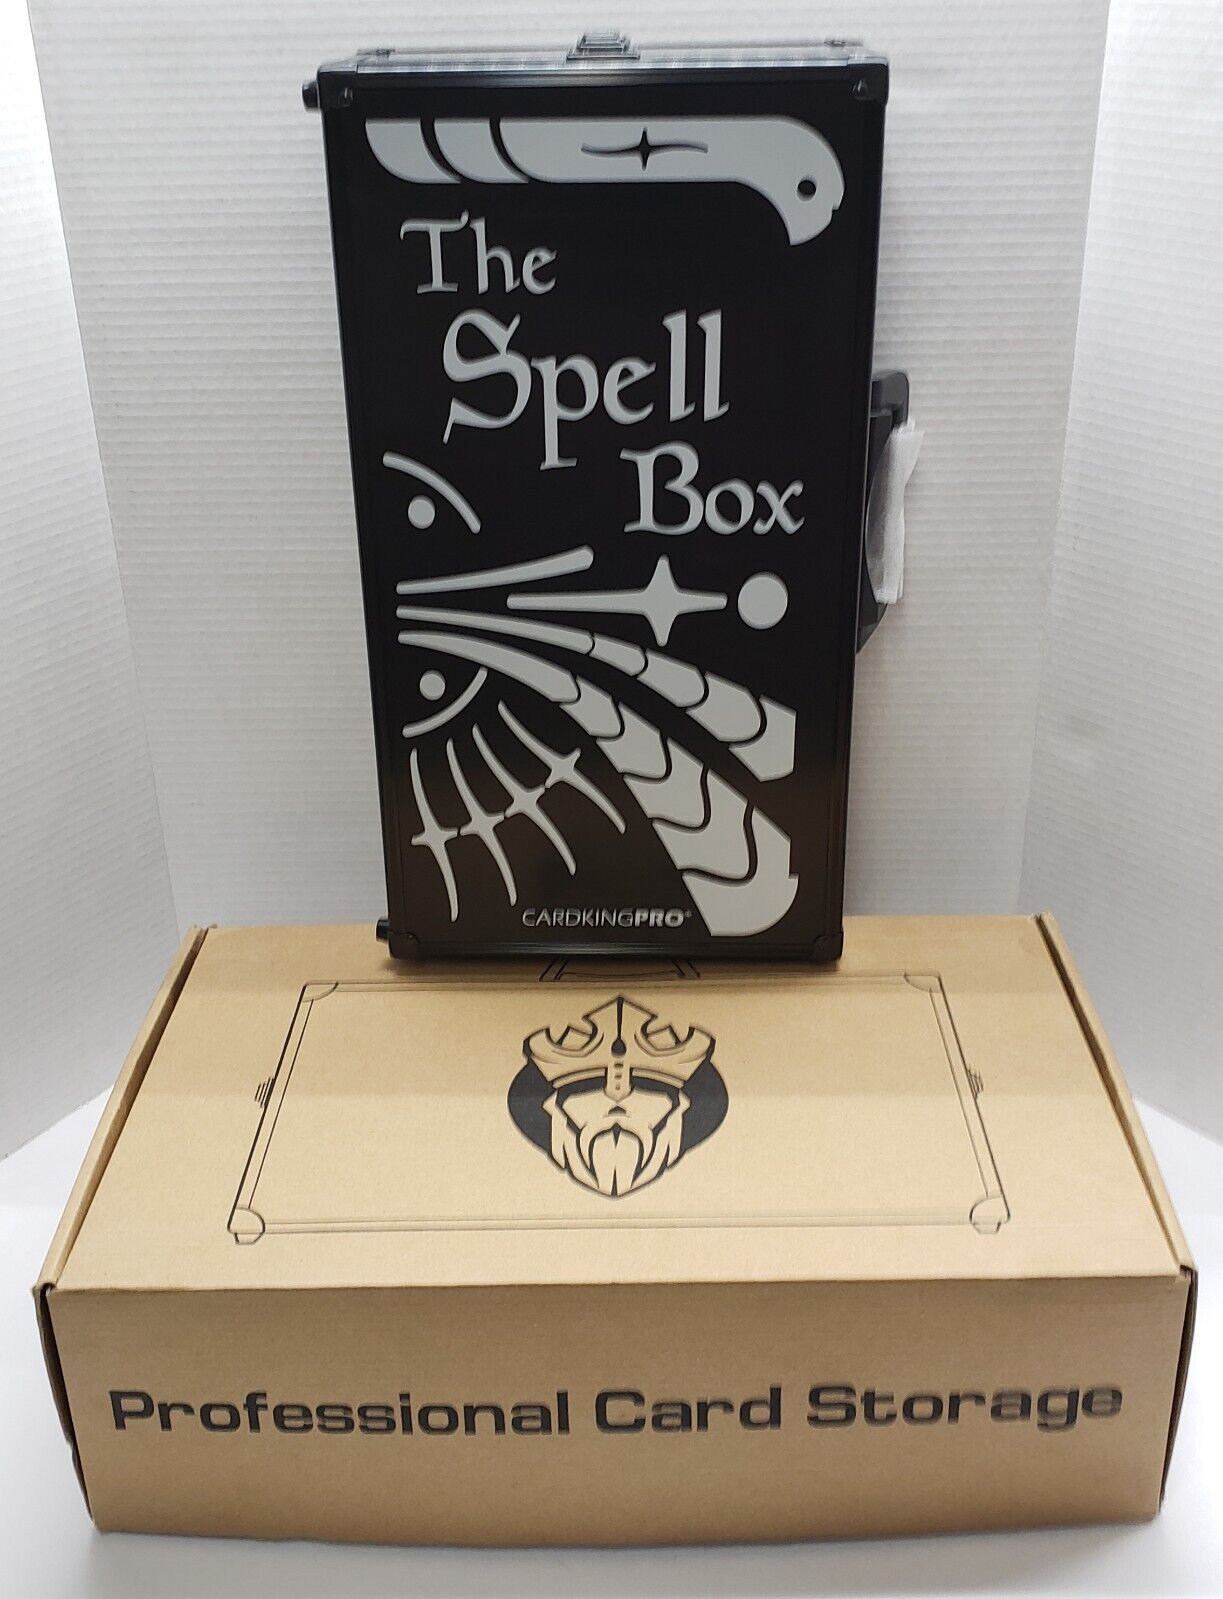 Cardking Pro The Spell Box Trading Card Storage Carry Case Holds 2500 Cards New